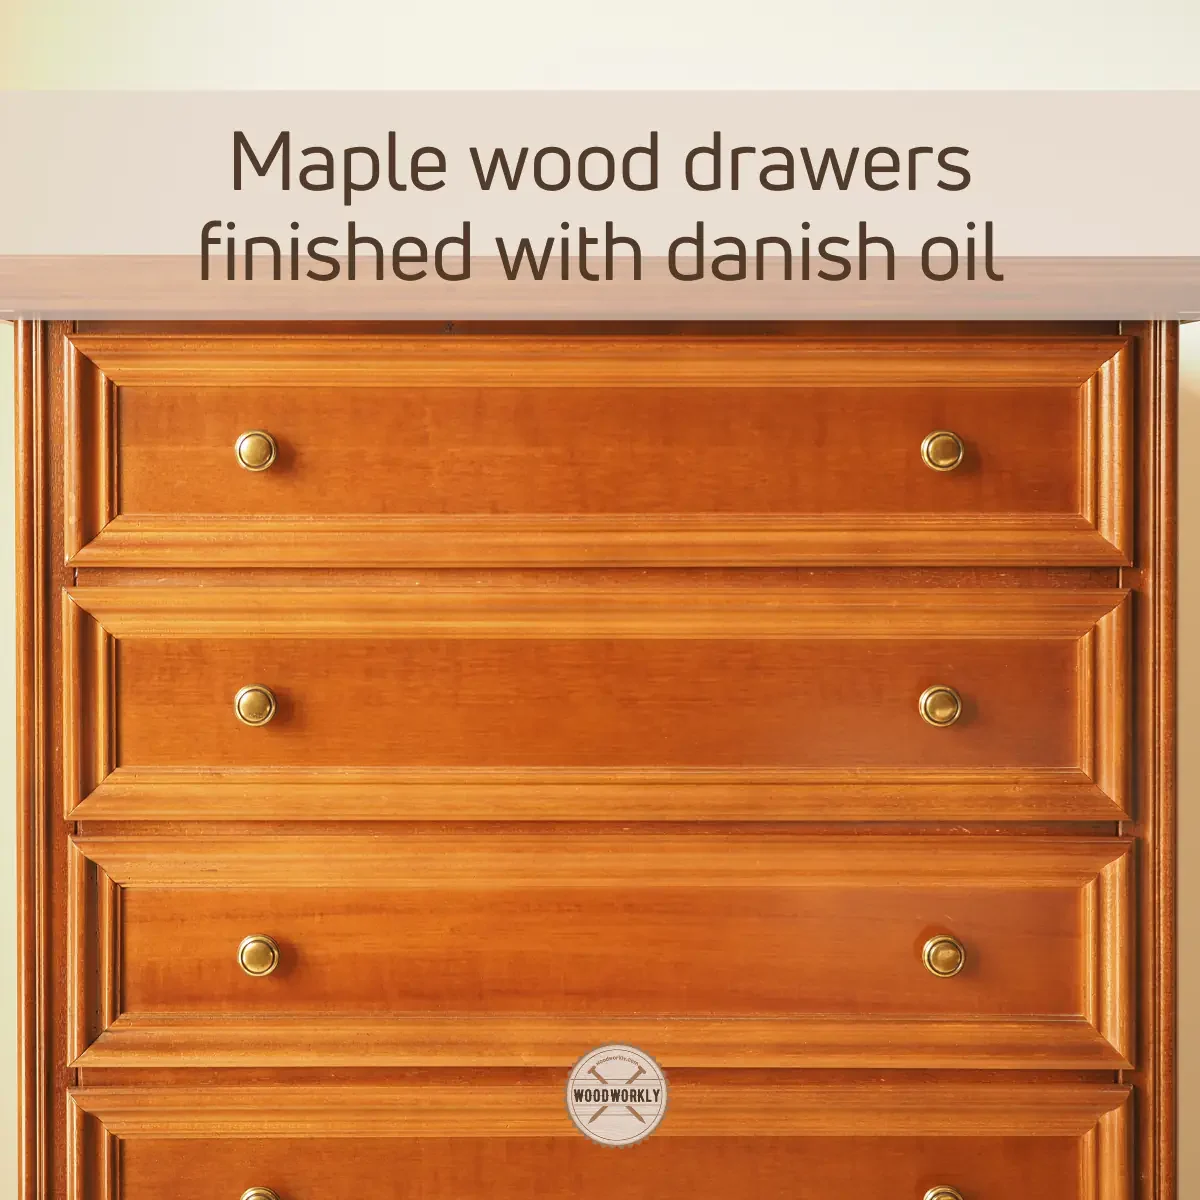 Maple wood Drawers finished with danish oil